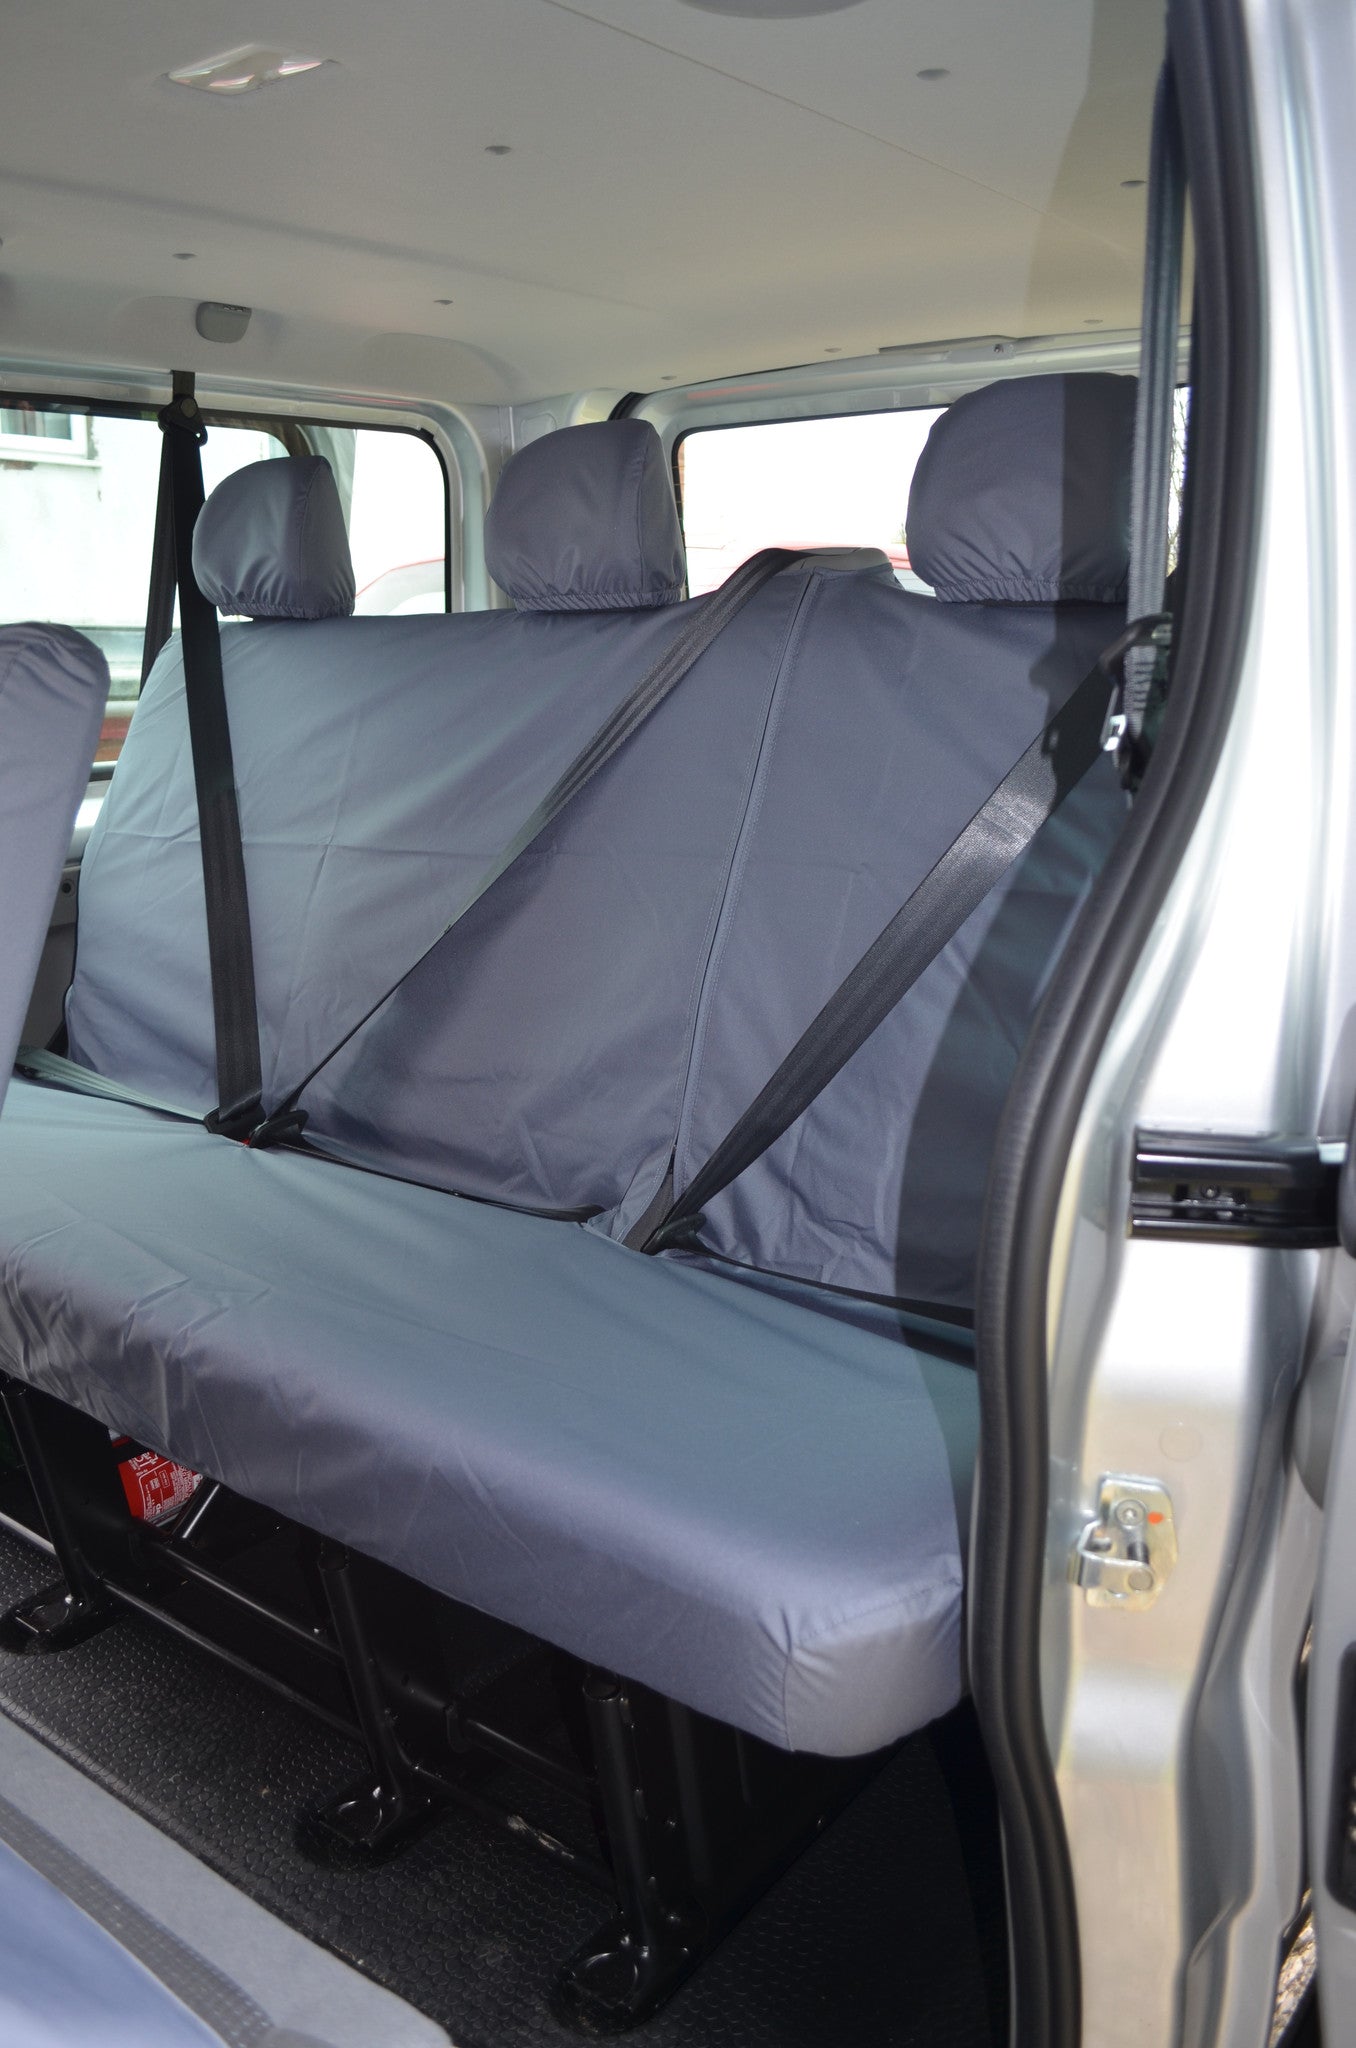 Renault Trafic Passenger 2001 - 2006 Seat Covers Grey / 3rd Row Bench Turtle Covers Ltd